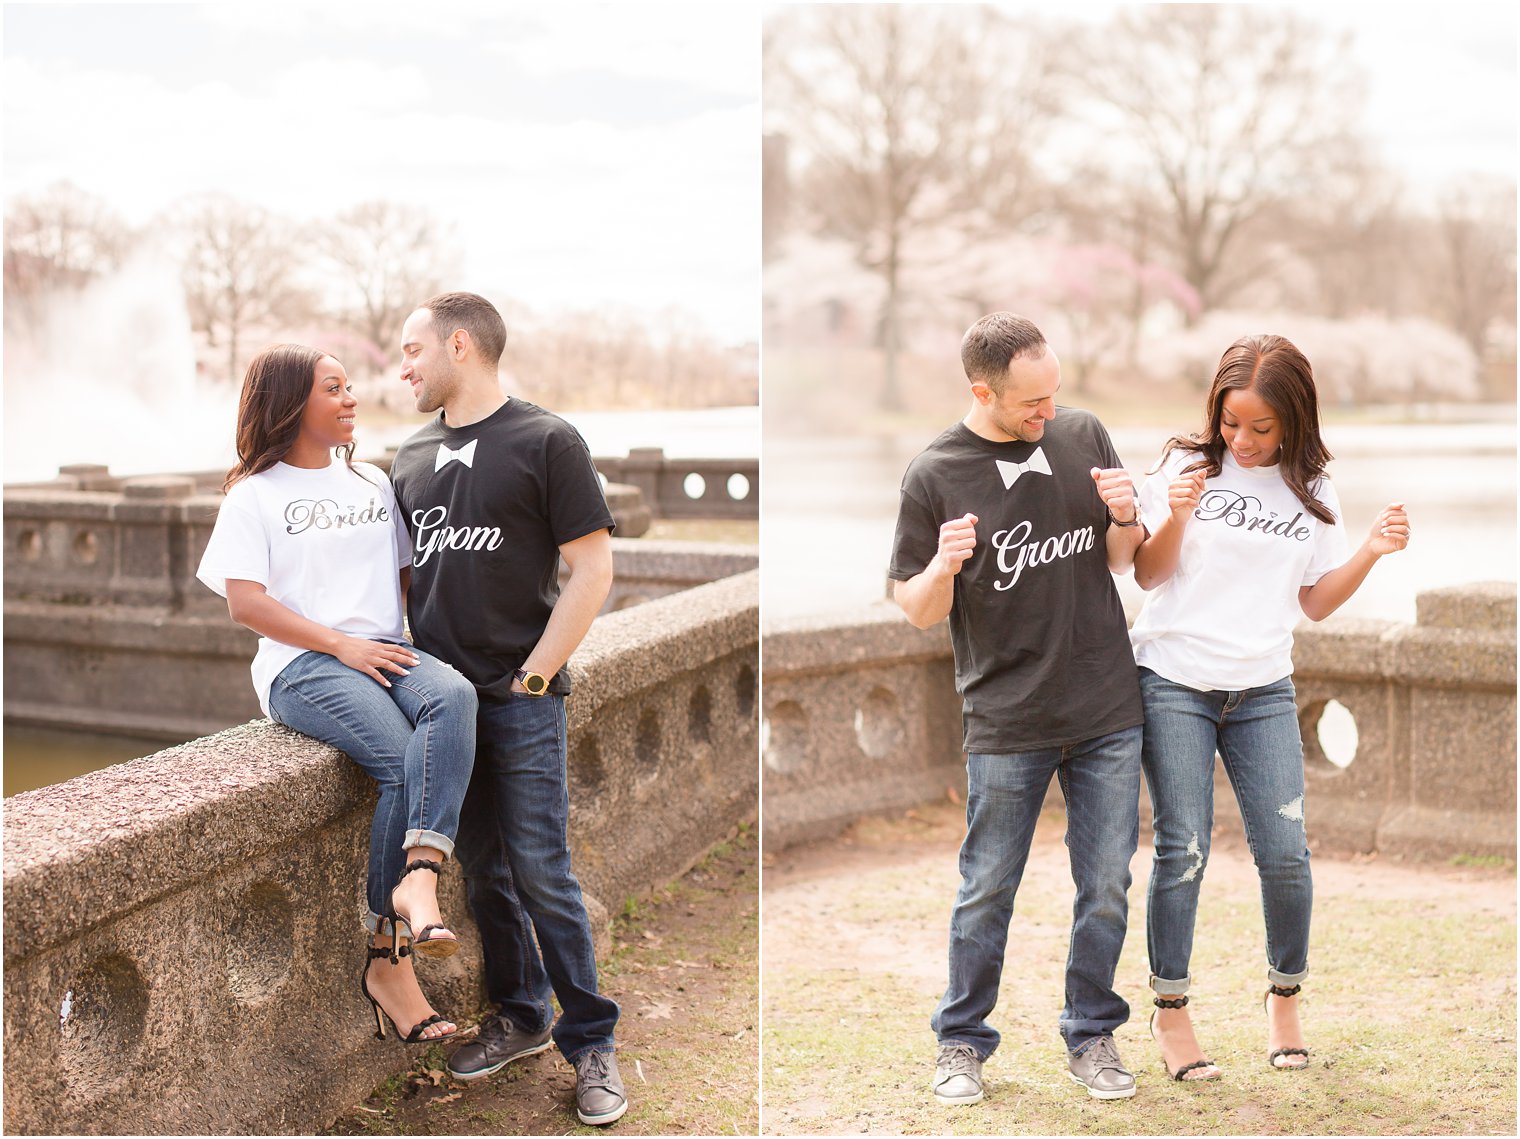 dancing photos of bride and groom with bride and groom t-shirts